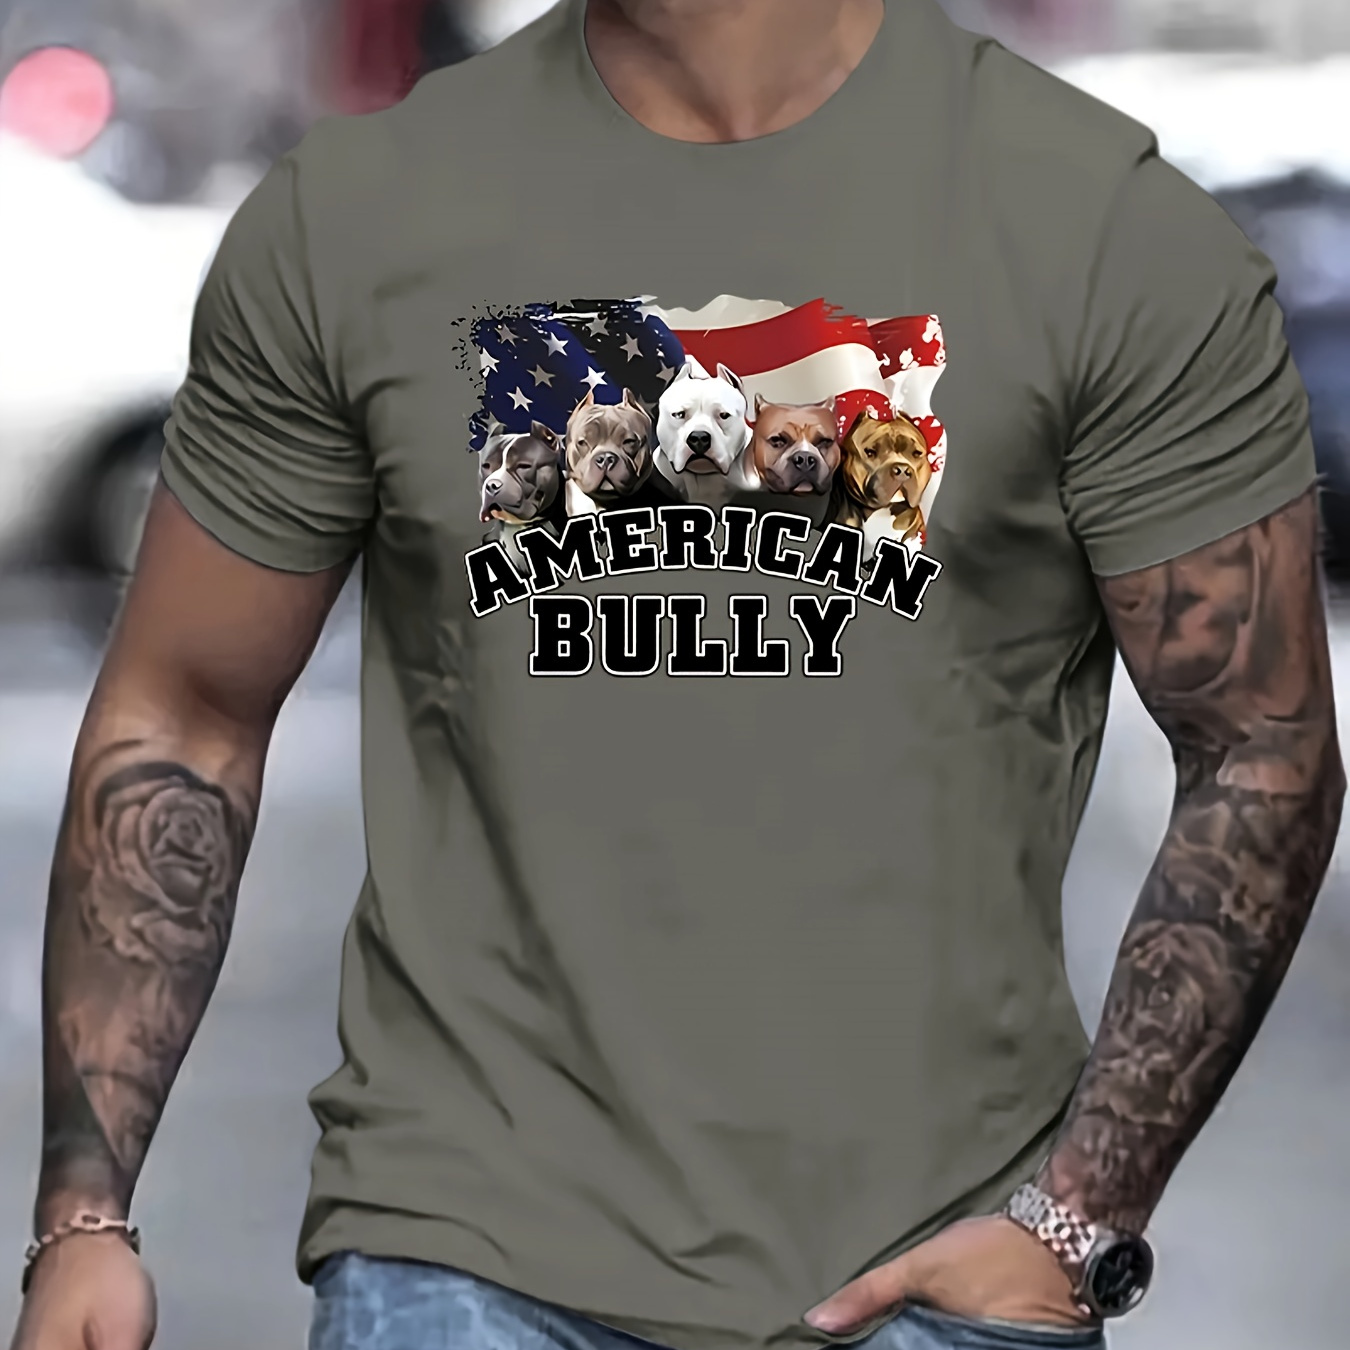 

American Bully Print T Shirt, Tees For Men, Casual Short Sleeve T-shirt For Summer